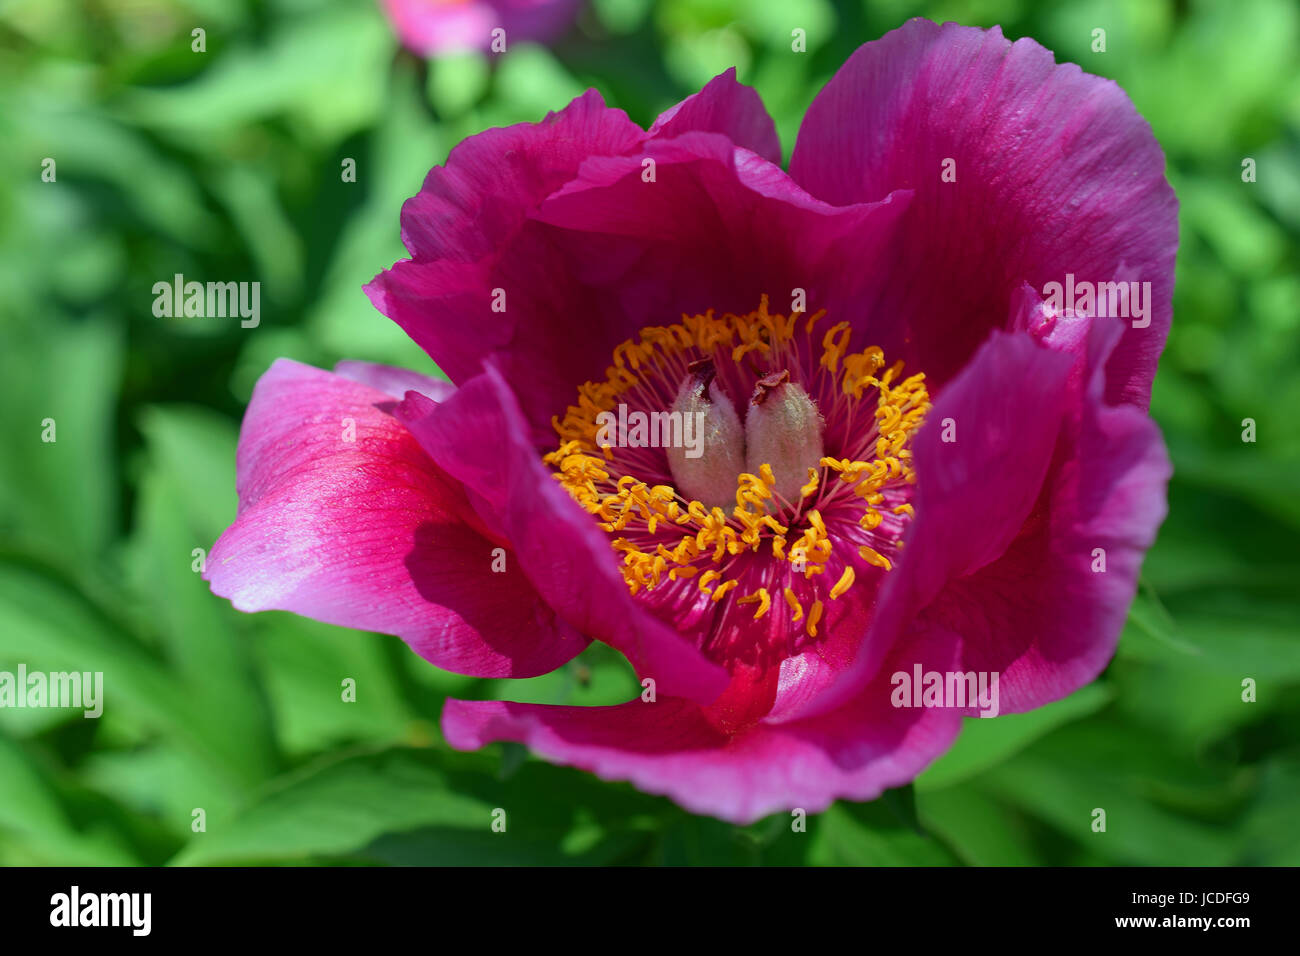 Pink Peony flower with green background. Stock Photo